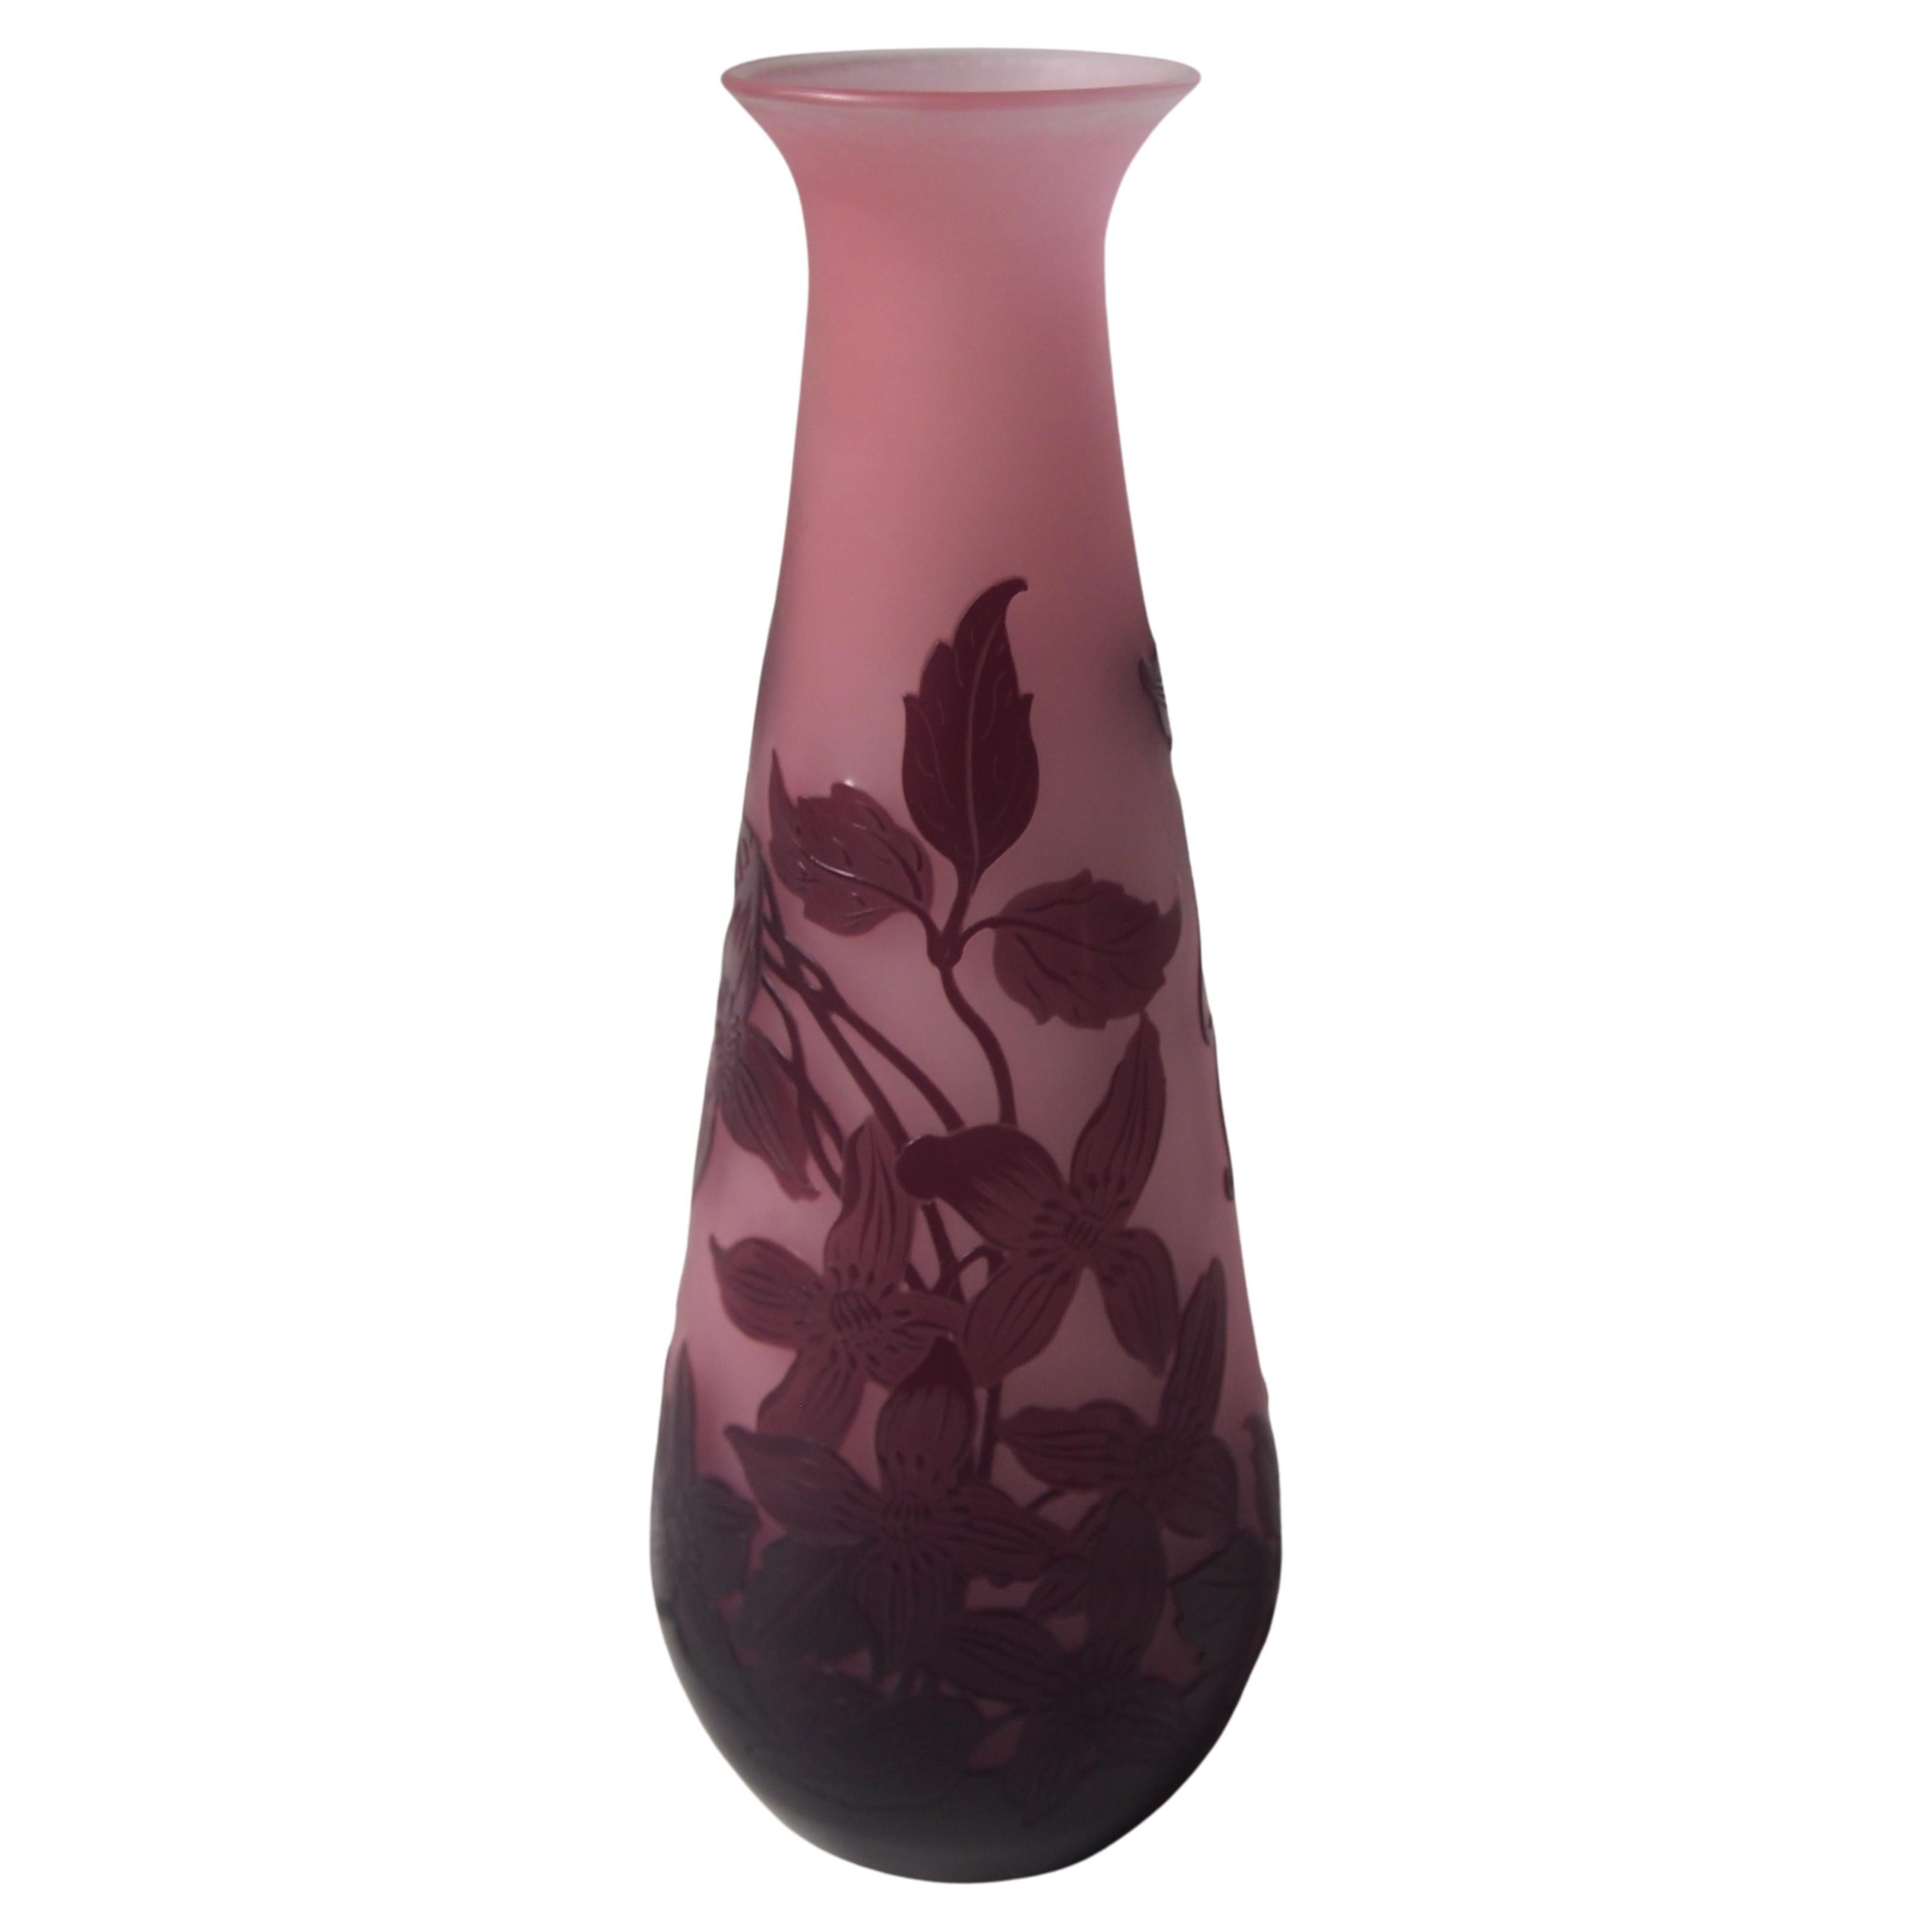 French Art Nouveau Pink and Purple Signed Emile Galle Cameo Vase, circa 1920 For Sale